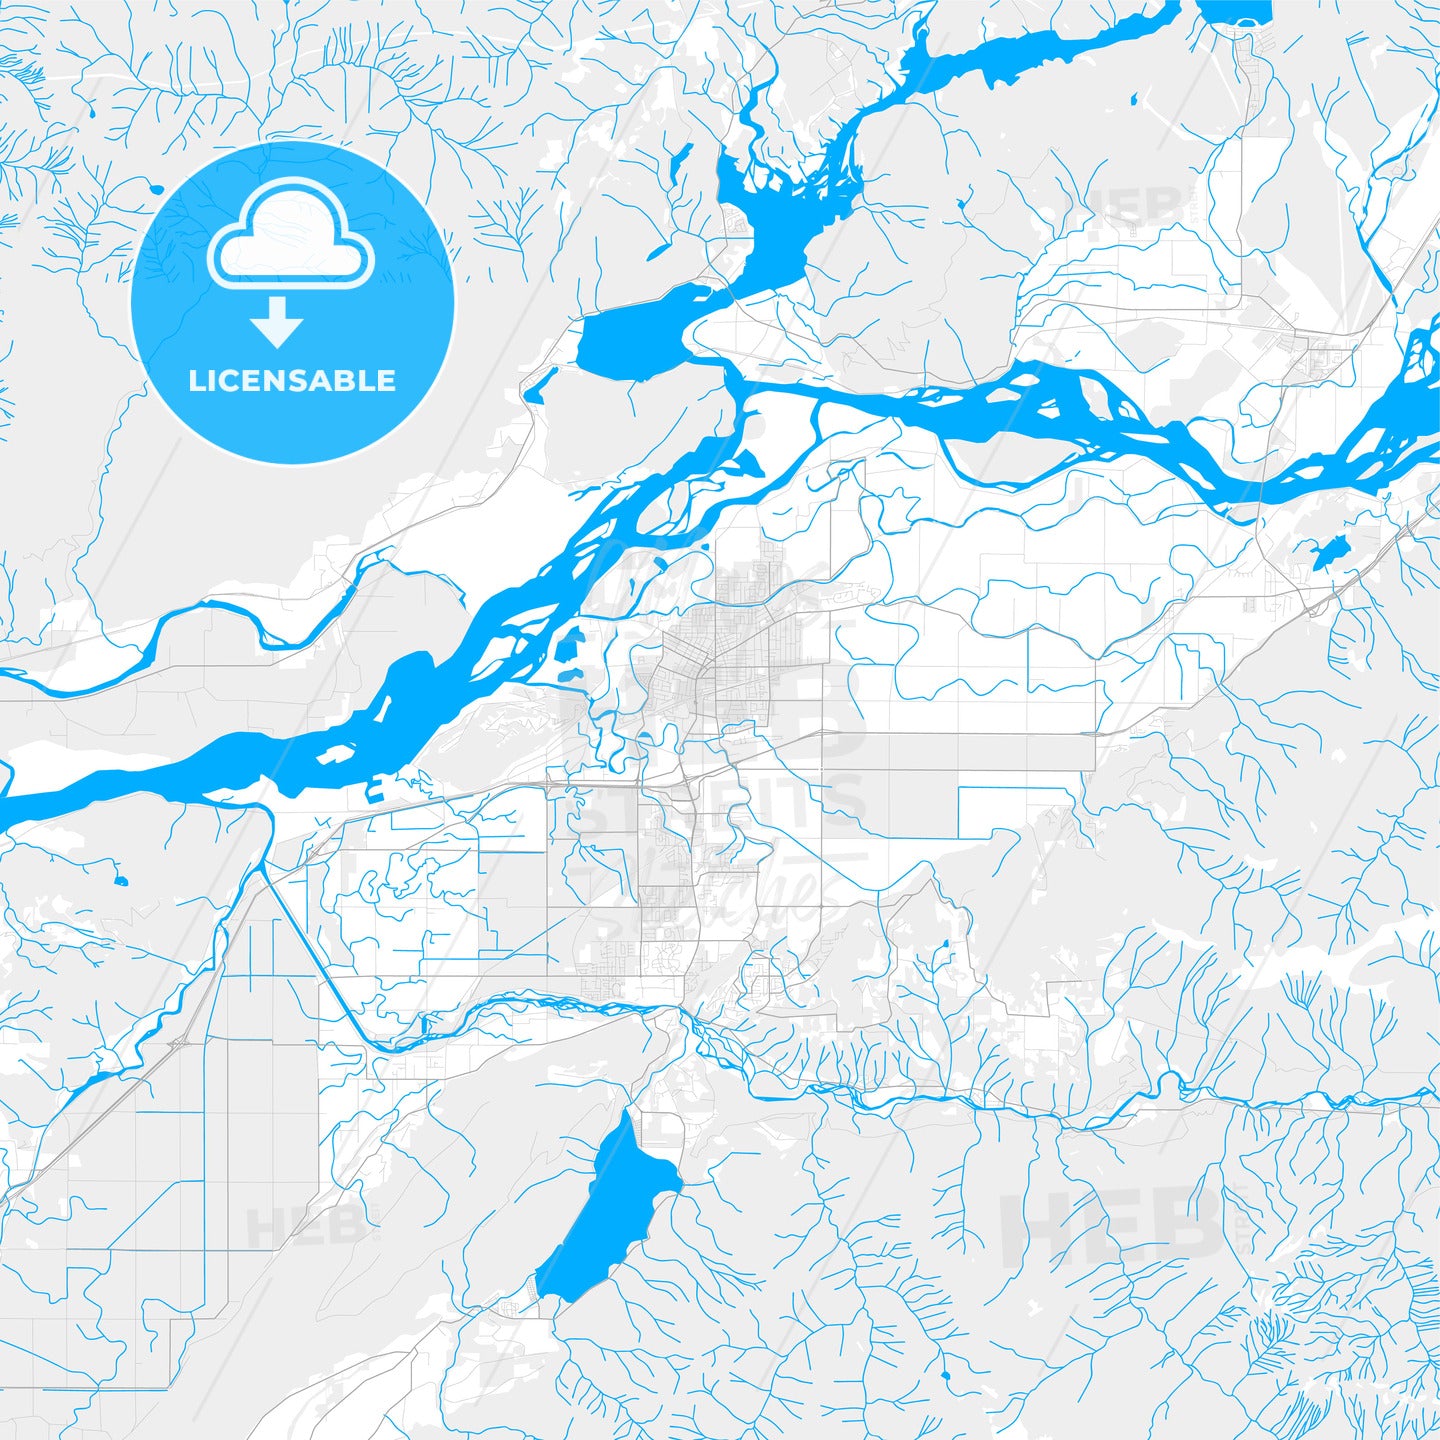 Rich detailed vector map of Chilliwack, British Columbia, Canada